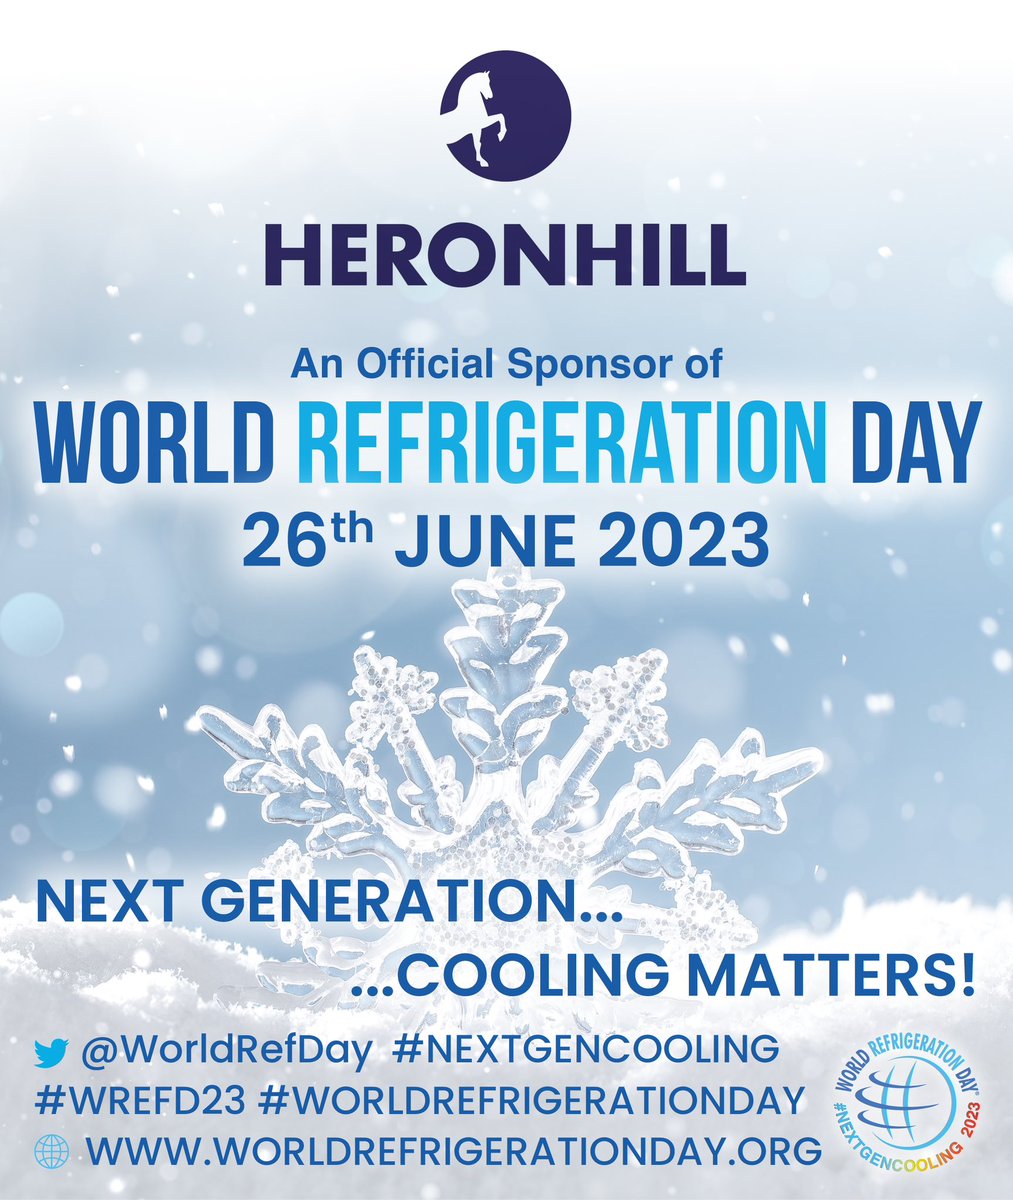 We are delighted to be an official sponsor of World Refrigeration Day again this year #WREFD23